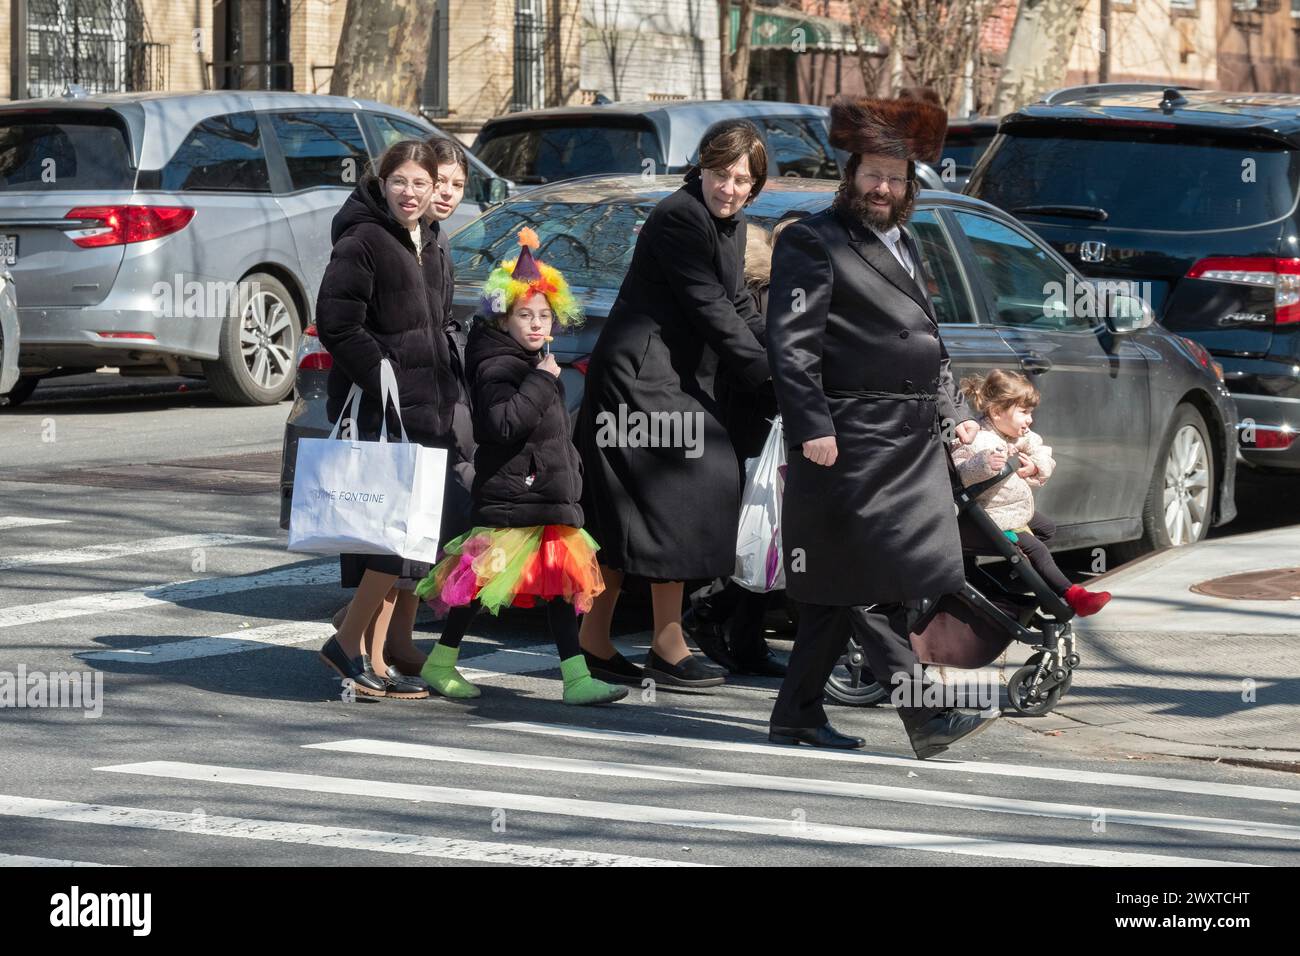 A Purim holiday street scene where it's customary for people to wear costumes and for some men to wear shtreimel fur hats. In Brooklyn, New York. Stock Photo